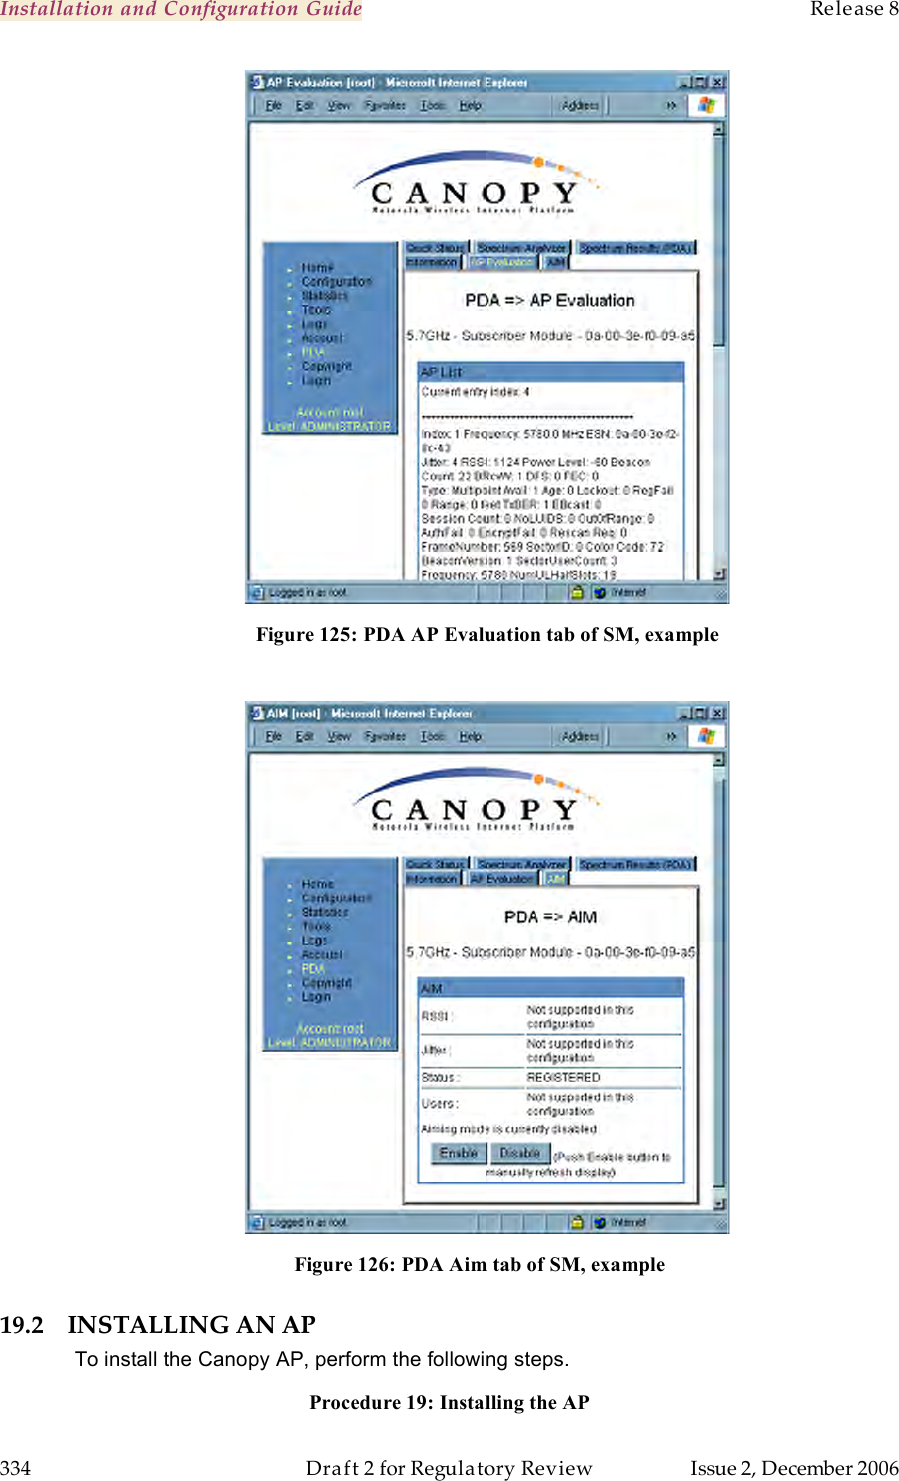 Installation and Configuration Guide    Release 8   334  Draft 2 for Regulatory Review  Issue 2, December 2006  Figure 125: PDA AP Evaluation tab of SM, example   Figure 126: PDA Aim tab of SM, example 19.2 INSTALLING AN AP To install the Canopy AP, perform the following steps. Procedure 19: Installing the AP 